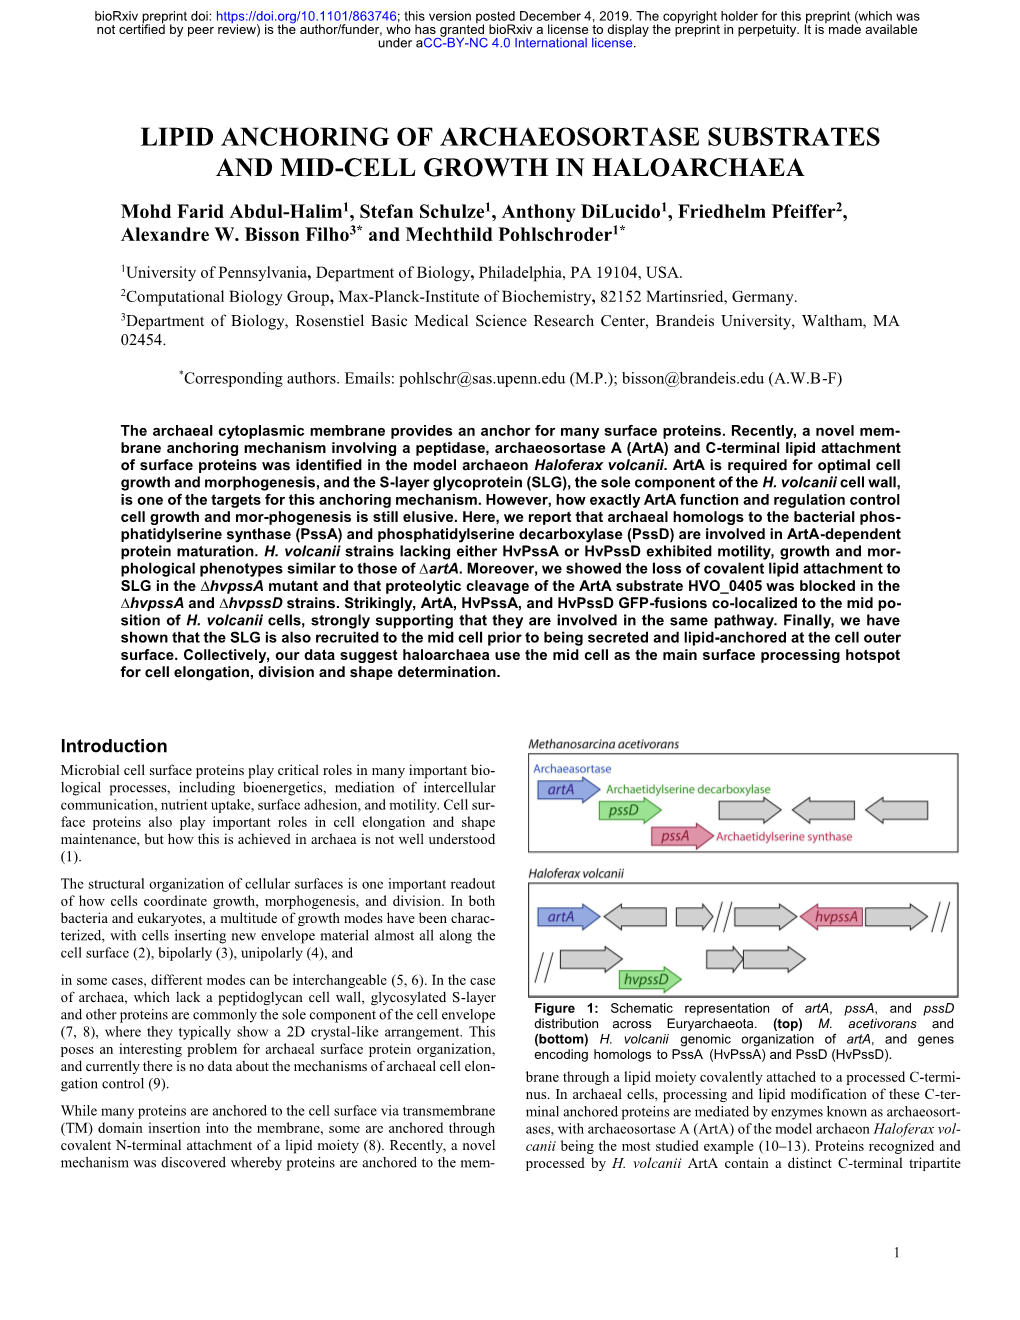 Lipid Anchoring of Archaeosortase Substrates and Mid-Cell Growth in Haloarchaea